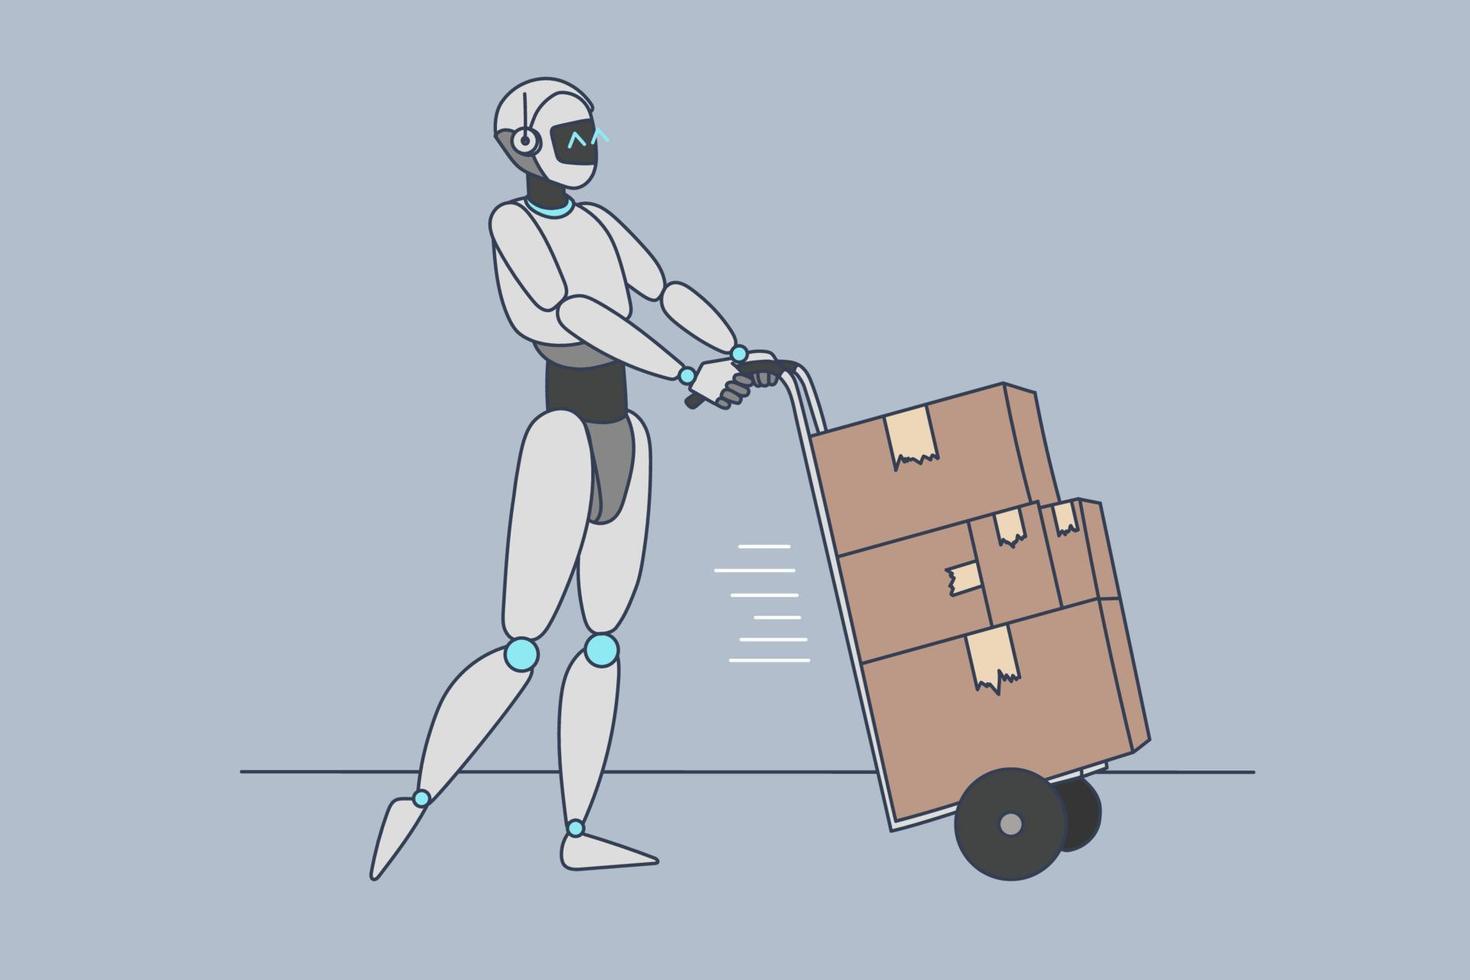 Robot assistant with track deliver packages parcels to people clients. Virtual digital humanoid helper carrier make delivery to customer. Modern technology, innovation. Flat vector illustration.